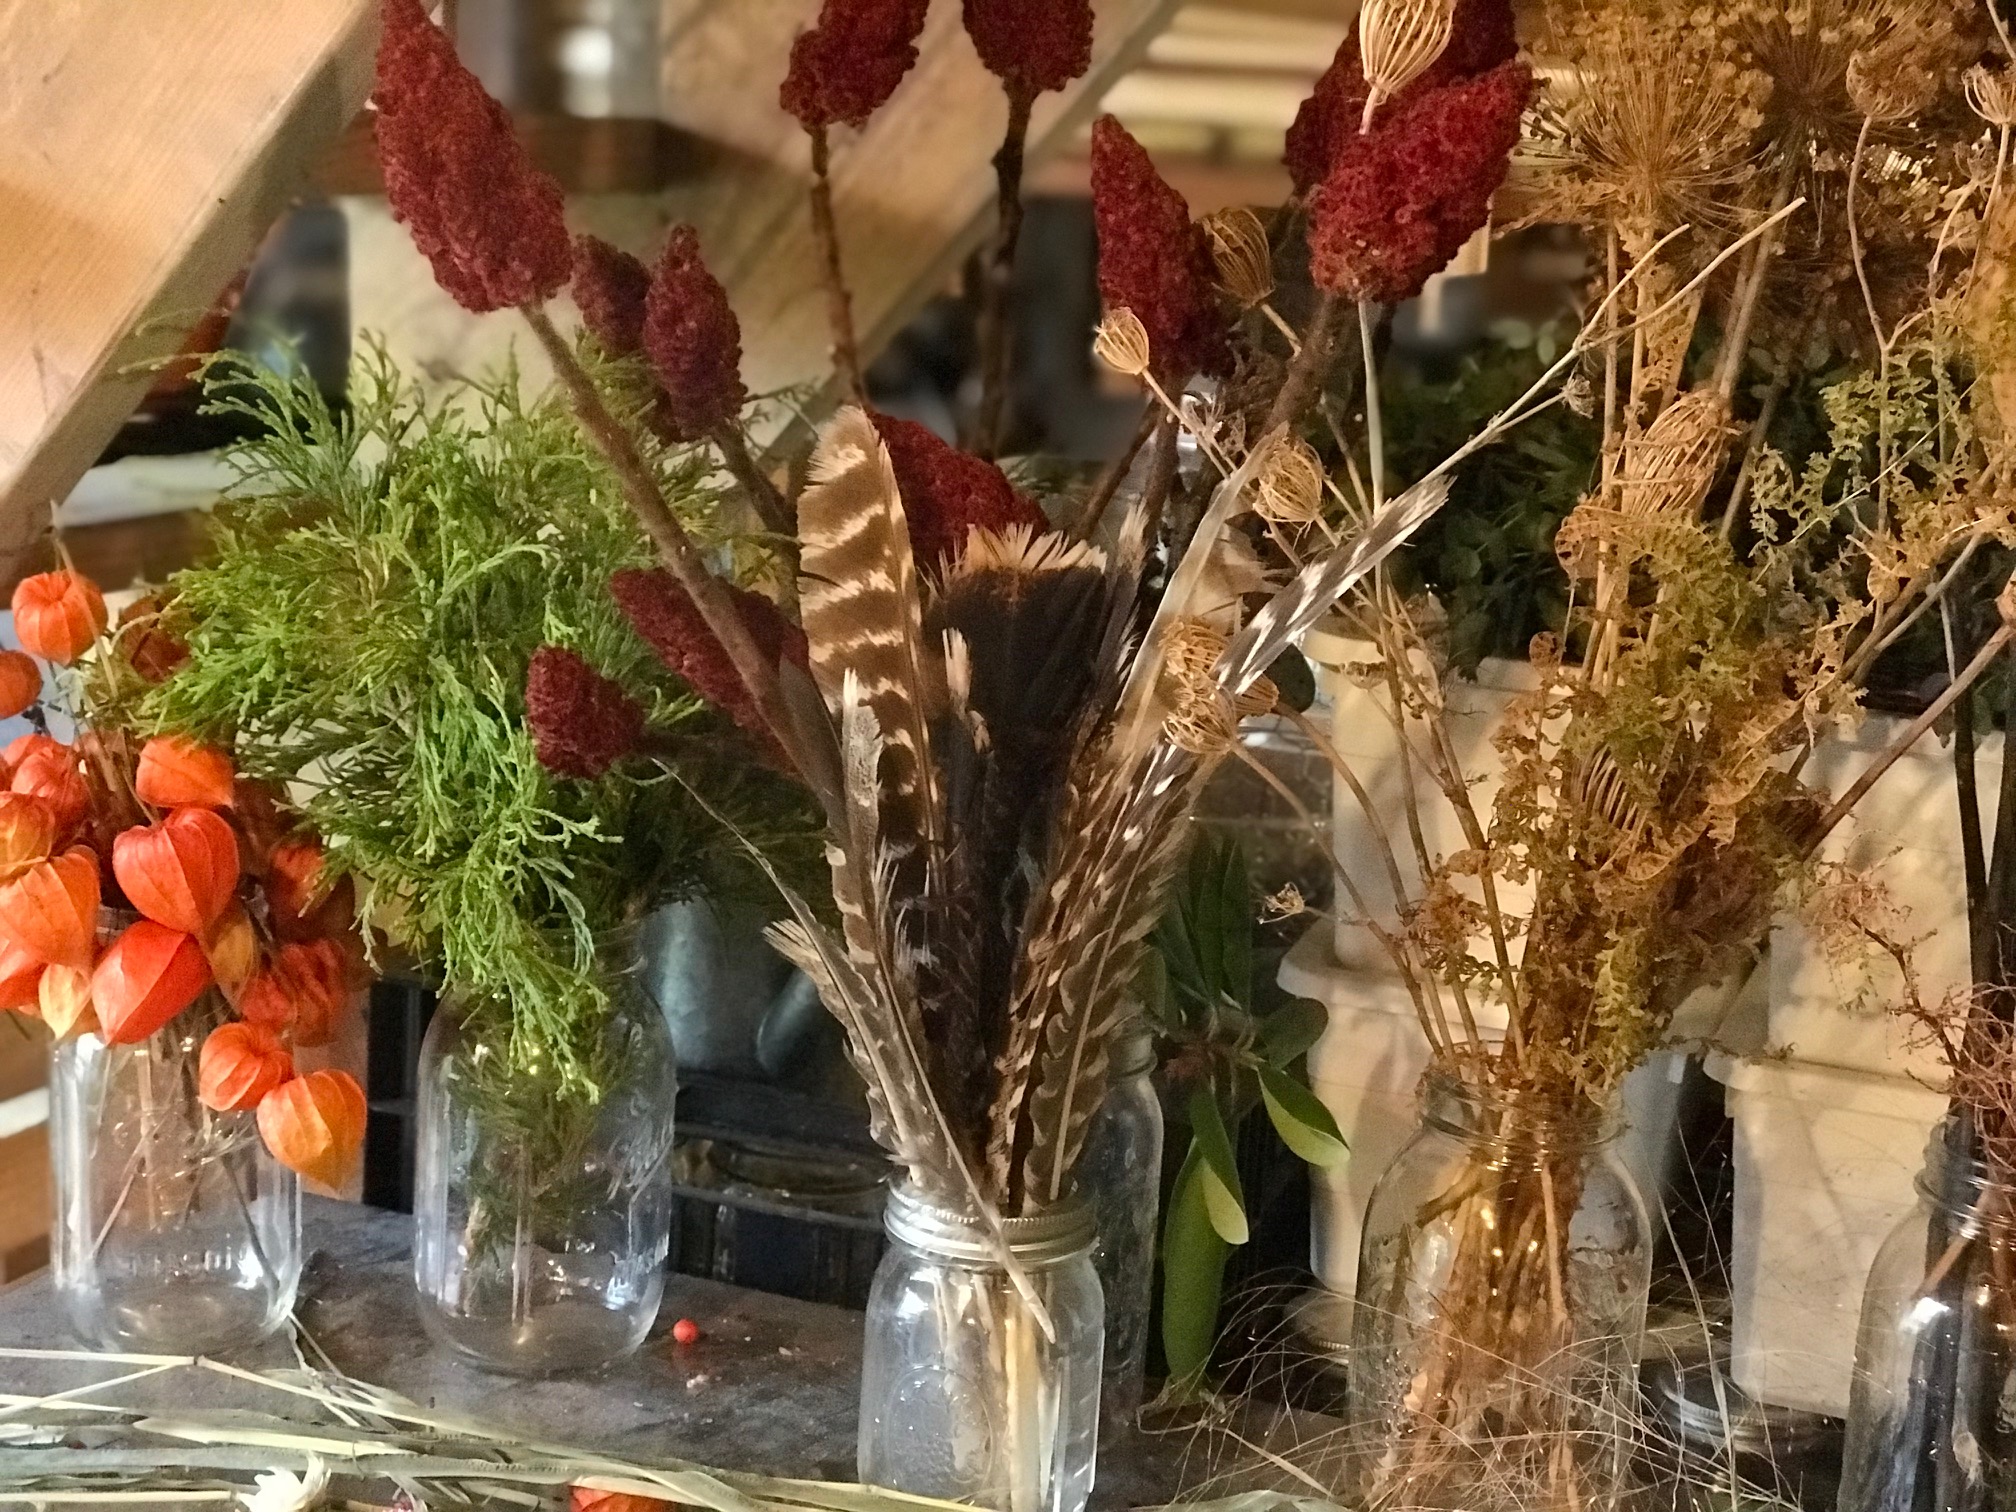 ingredients for a dried wreath workshop